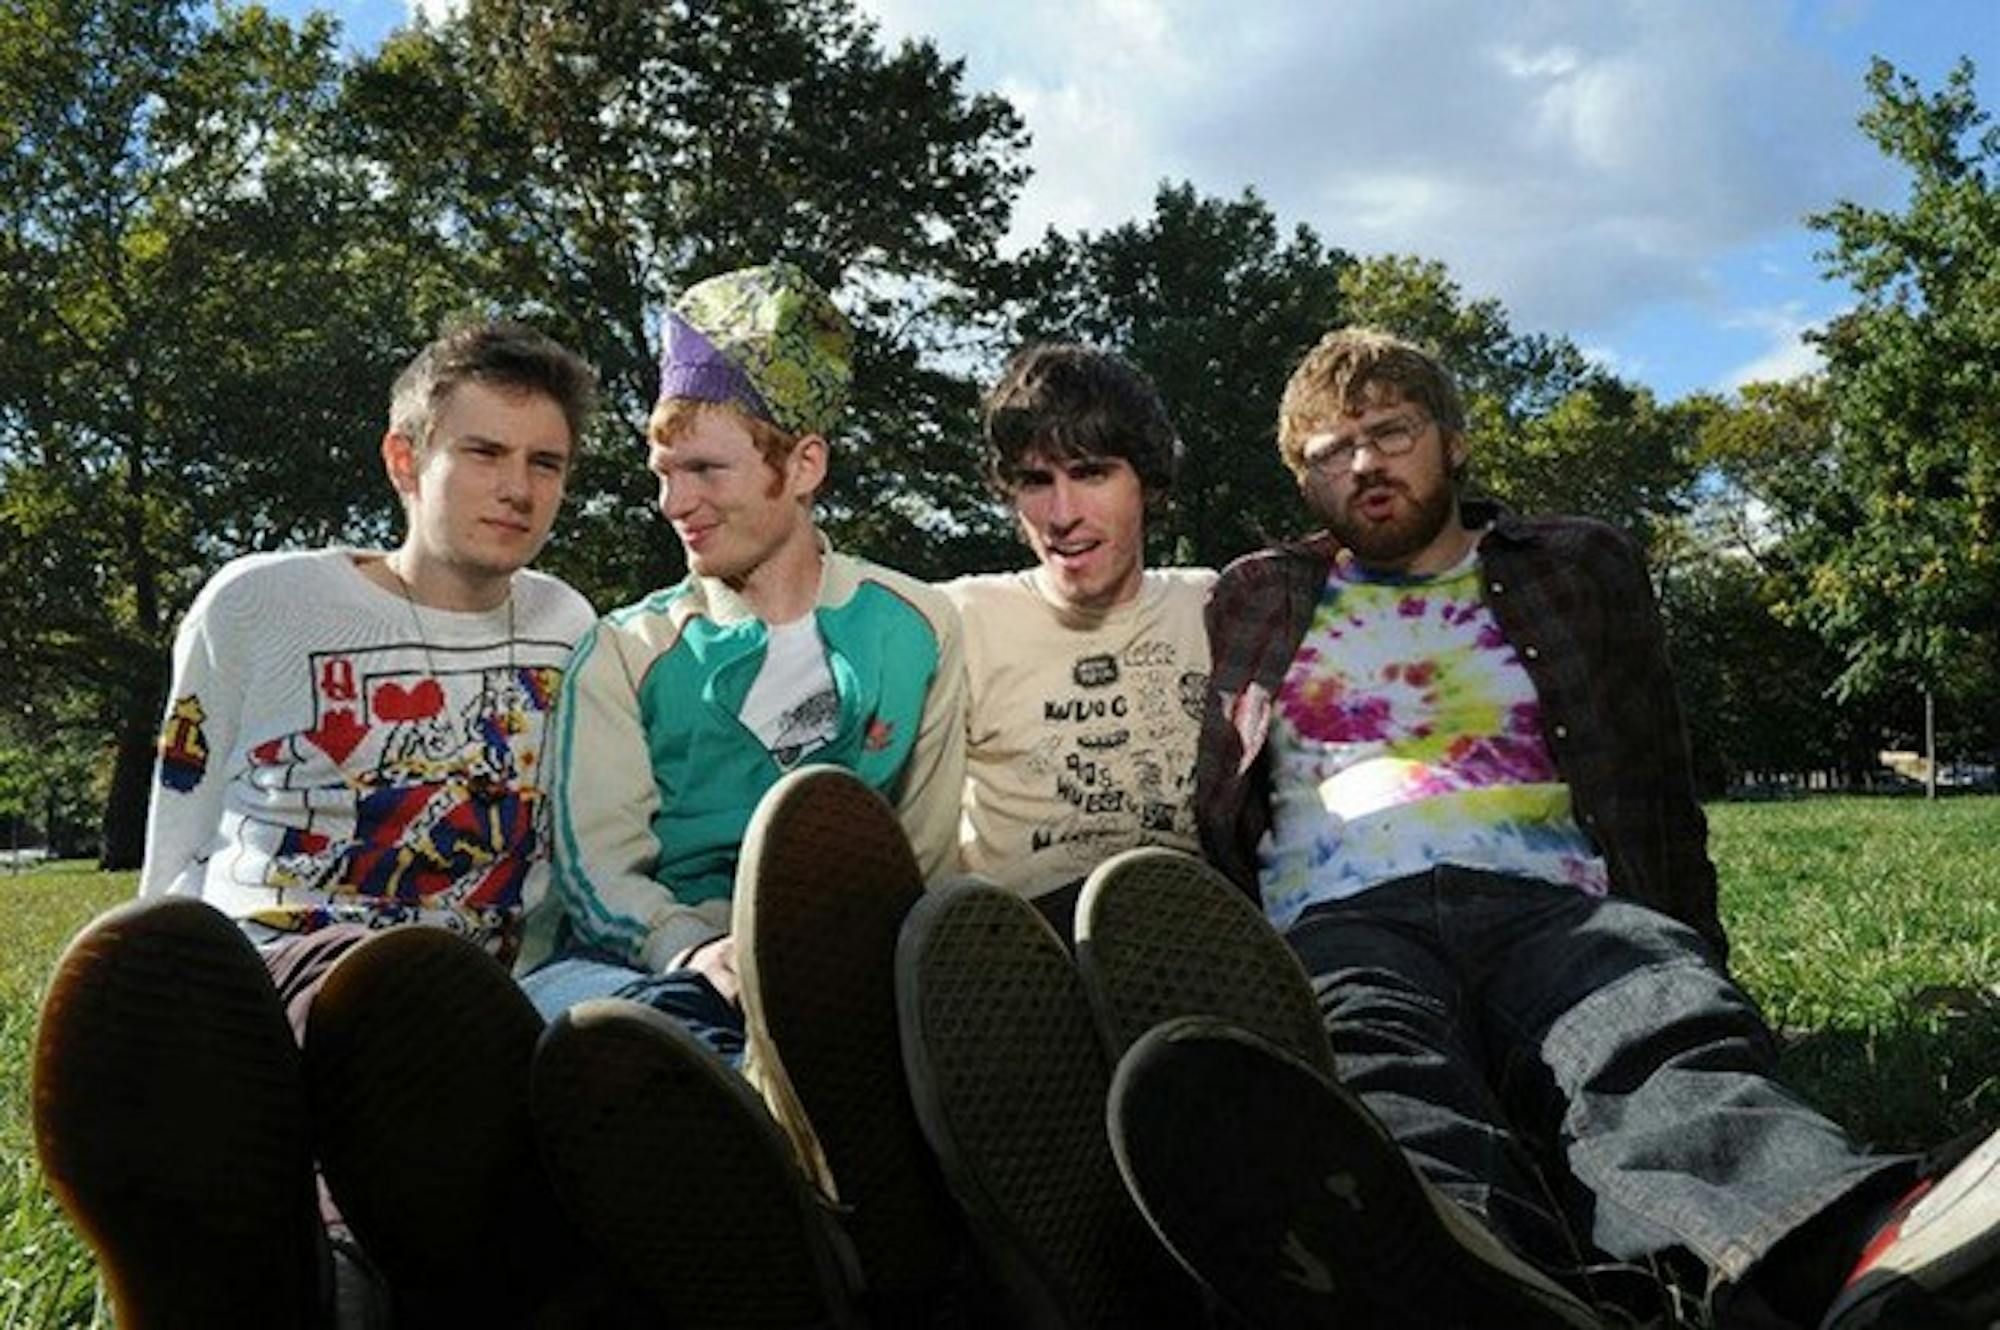 Reptar, which includes Ryan Engelberger '12 (far right), has played at music festivals across the country.